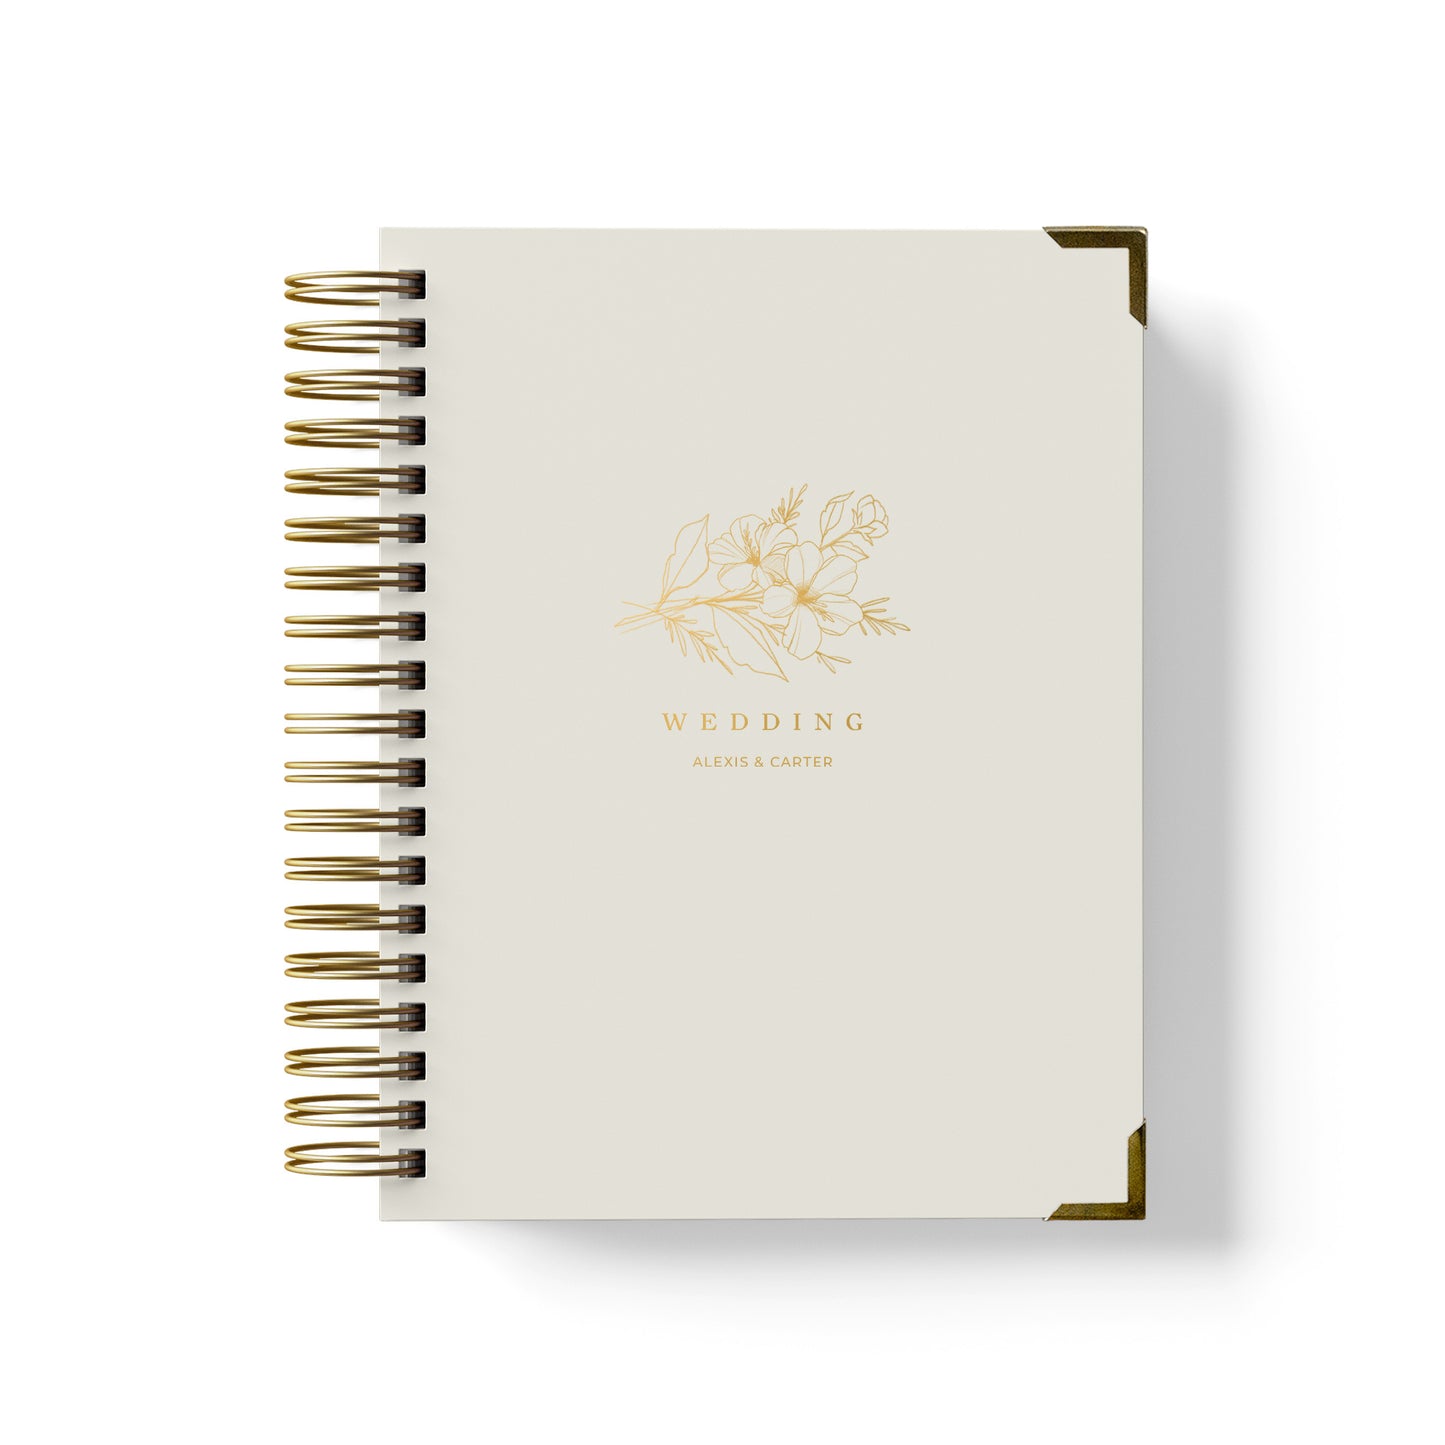 Our luxury wedding planner books are the best a bride can buy, featured in a floral sprig design